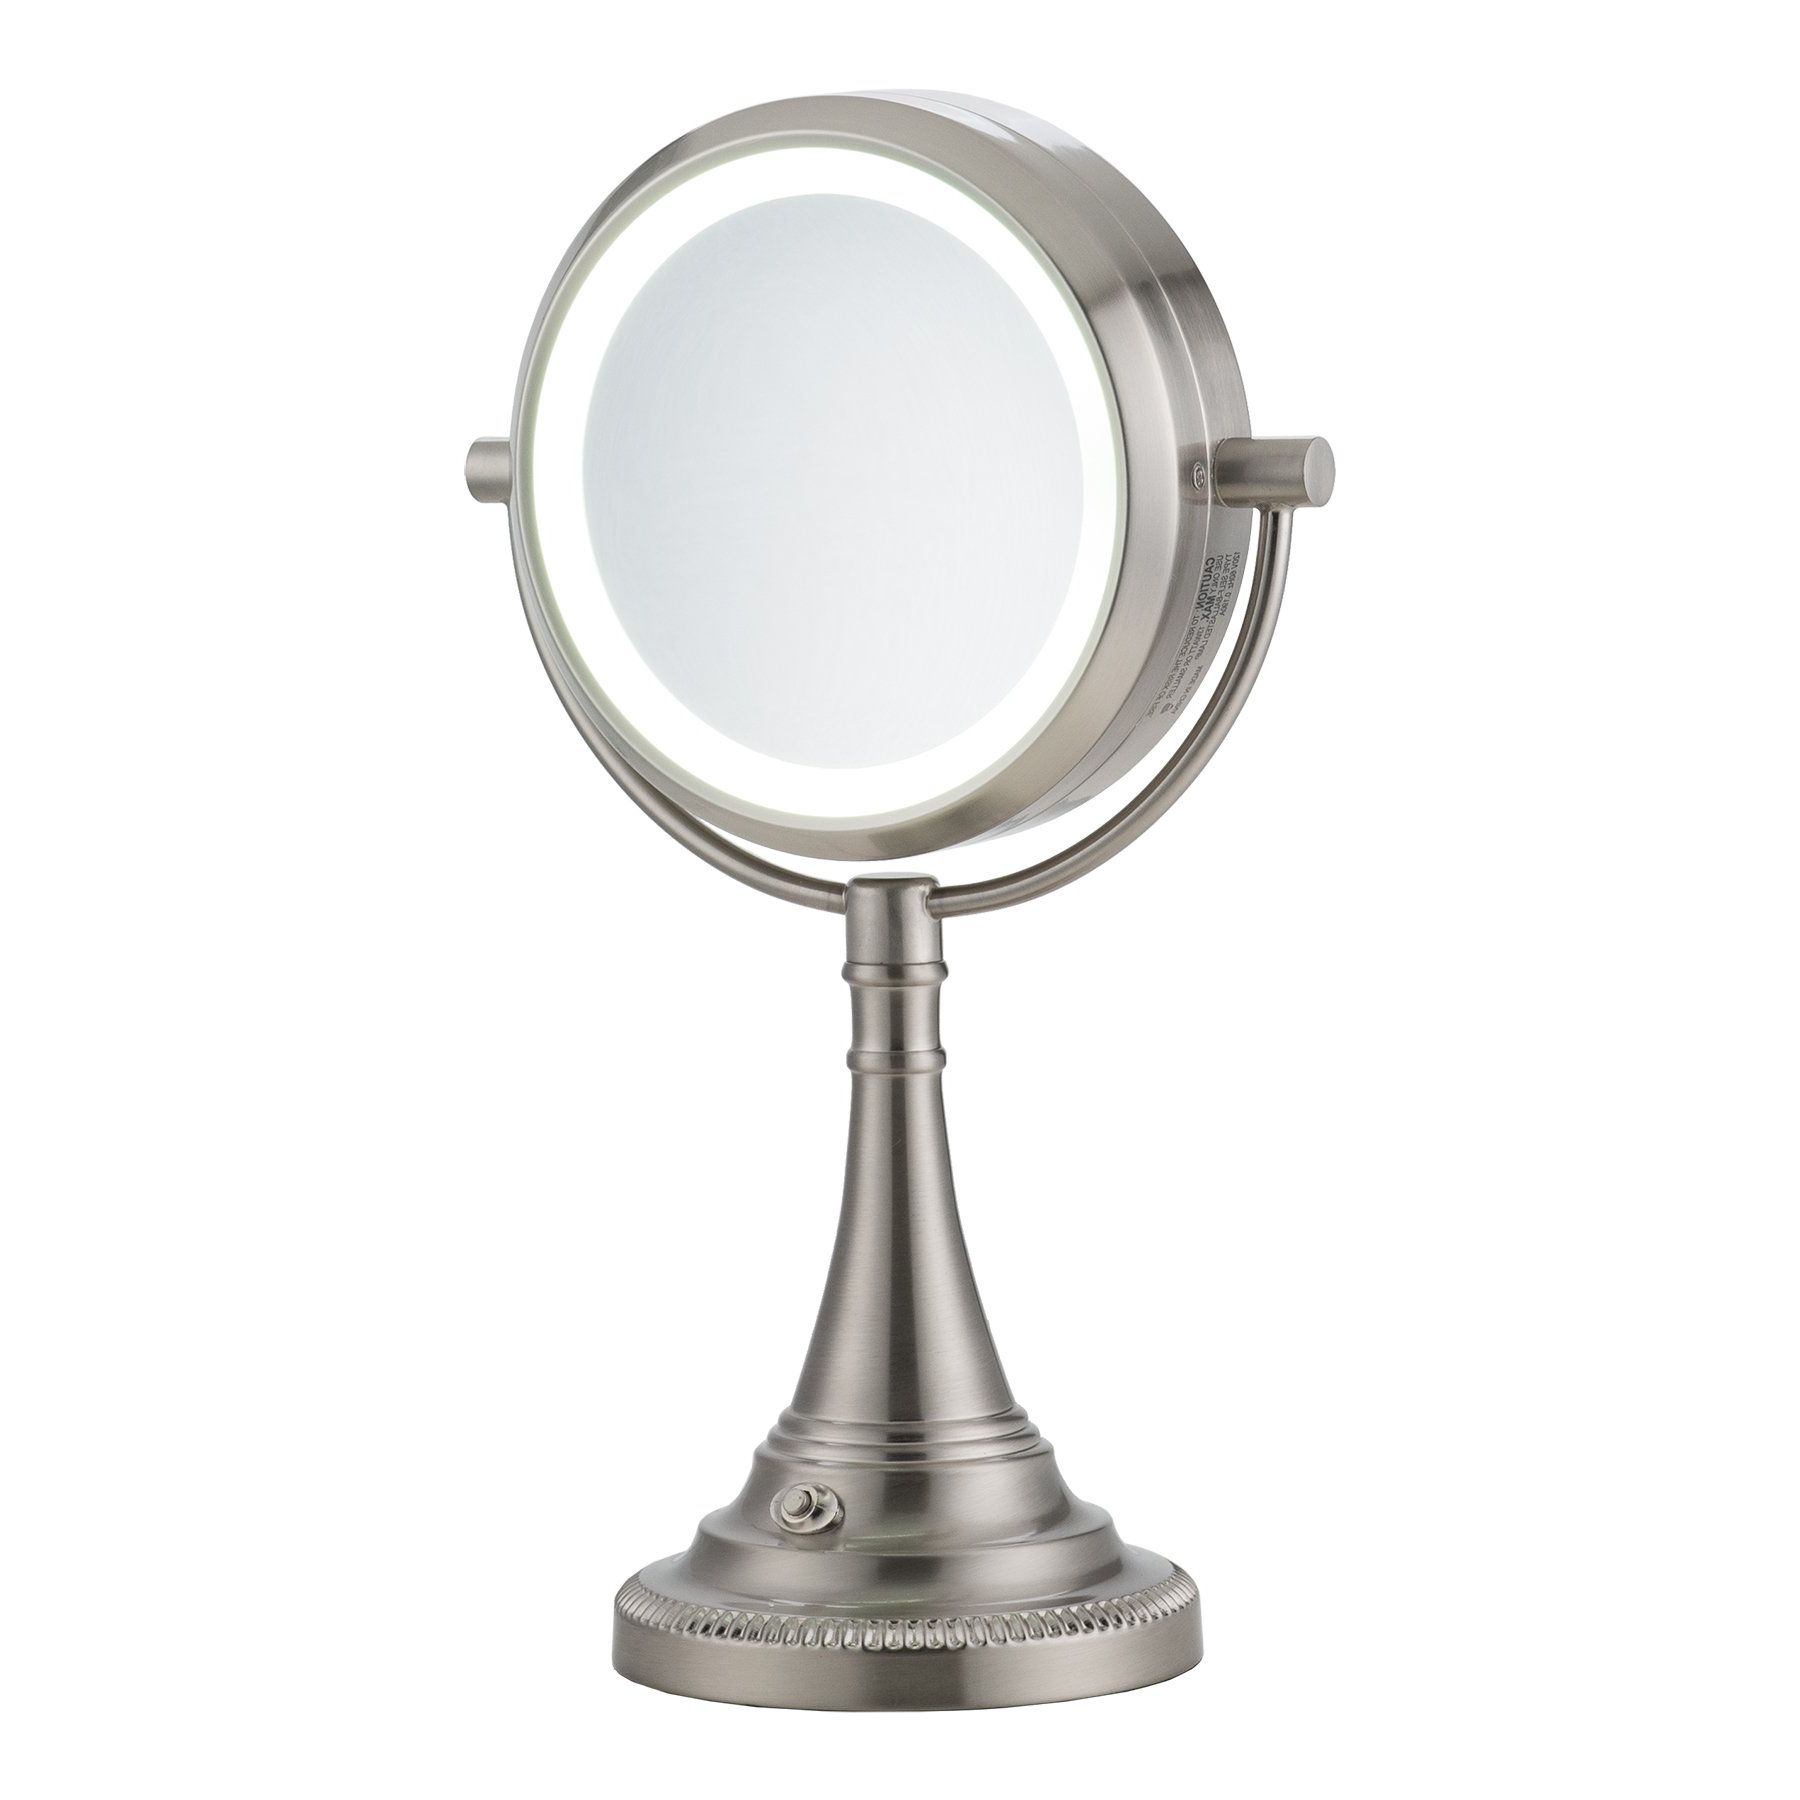 Co Z Elegant Magnifying Lighted Makeup Vanity Mirror, Dual Sided Within Well Liked Single Sided Polished Nickel Wall Mirrors (View 7 of 15)